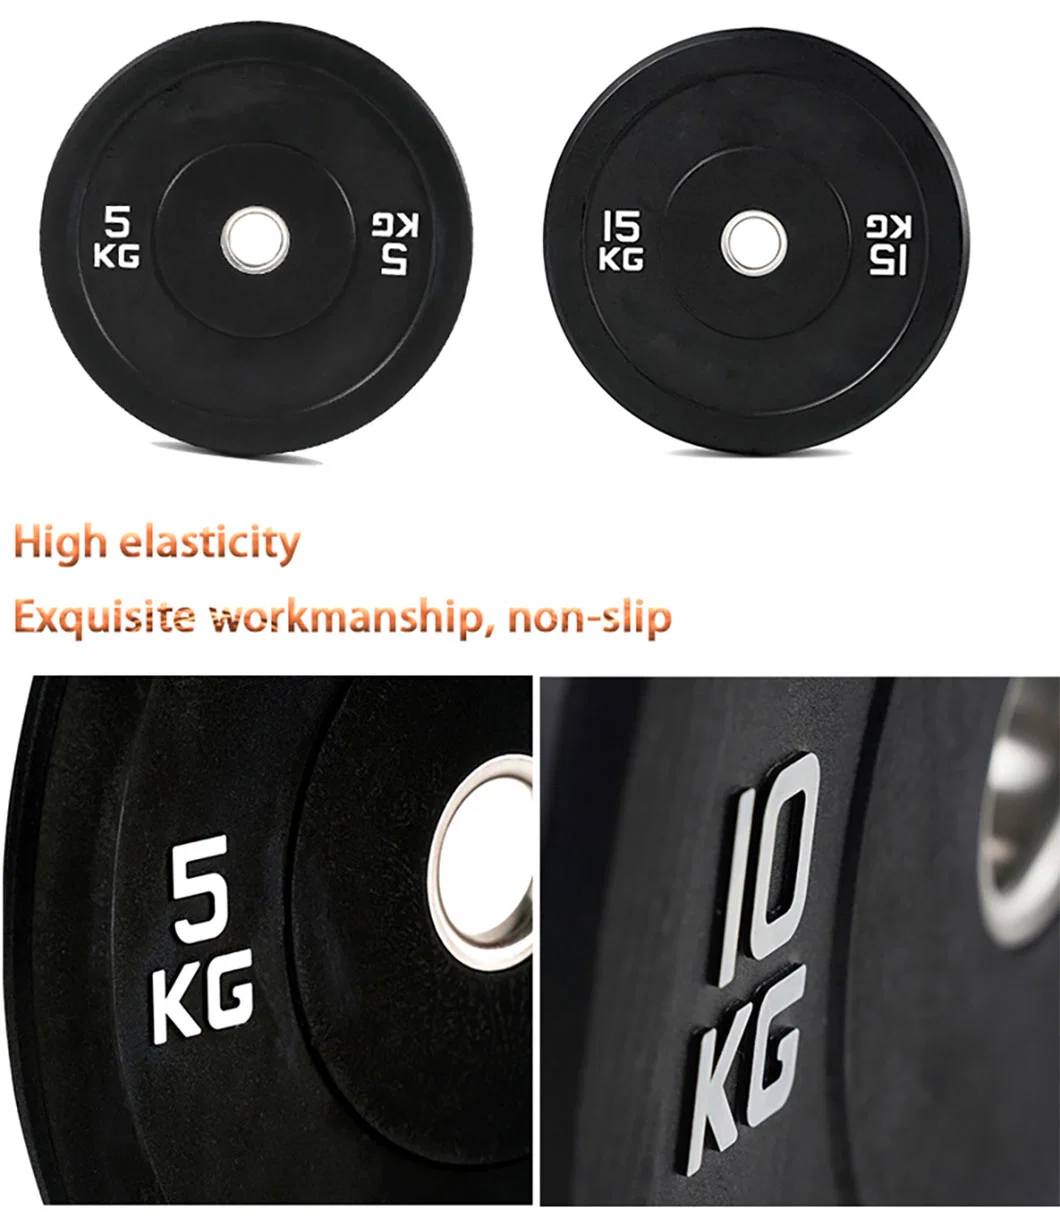 Bumper Plates Barbell Plate Olympi Rubber Grip Plates 2-Inch Weight Plates Unisex-Adult Weight Plate Set Bumper Plates Stainless Steel Inserts Premium Bumper